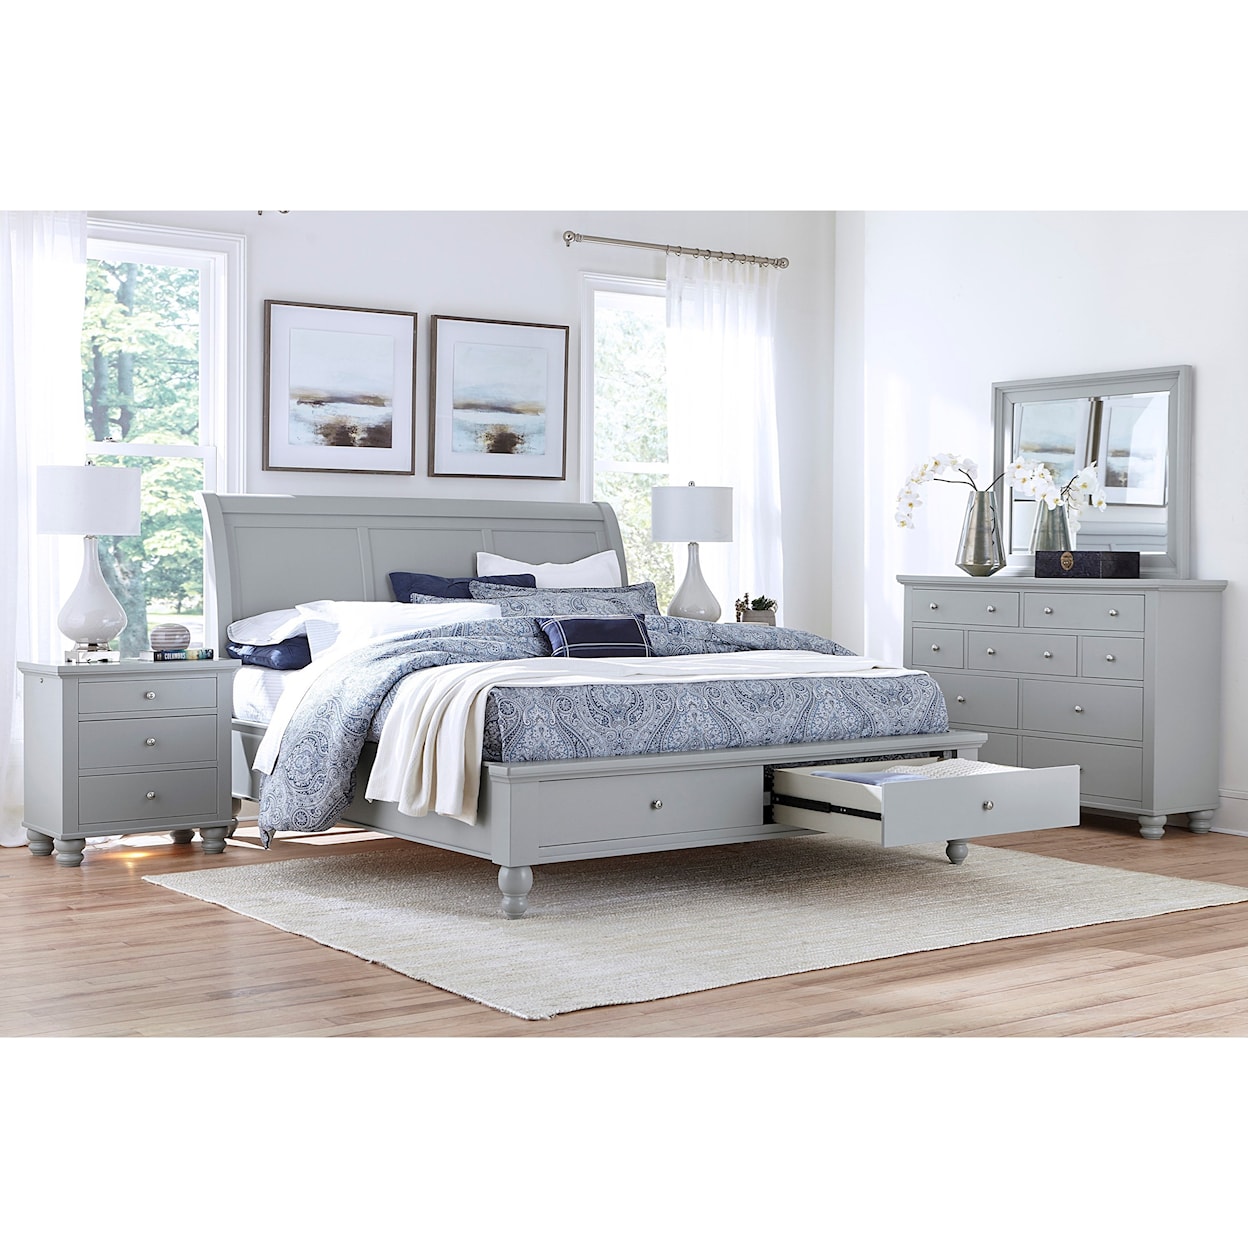 Aspenhome Cambridge CHY Queen Sleigh Bed With Storage Drawers